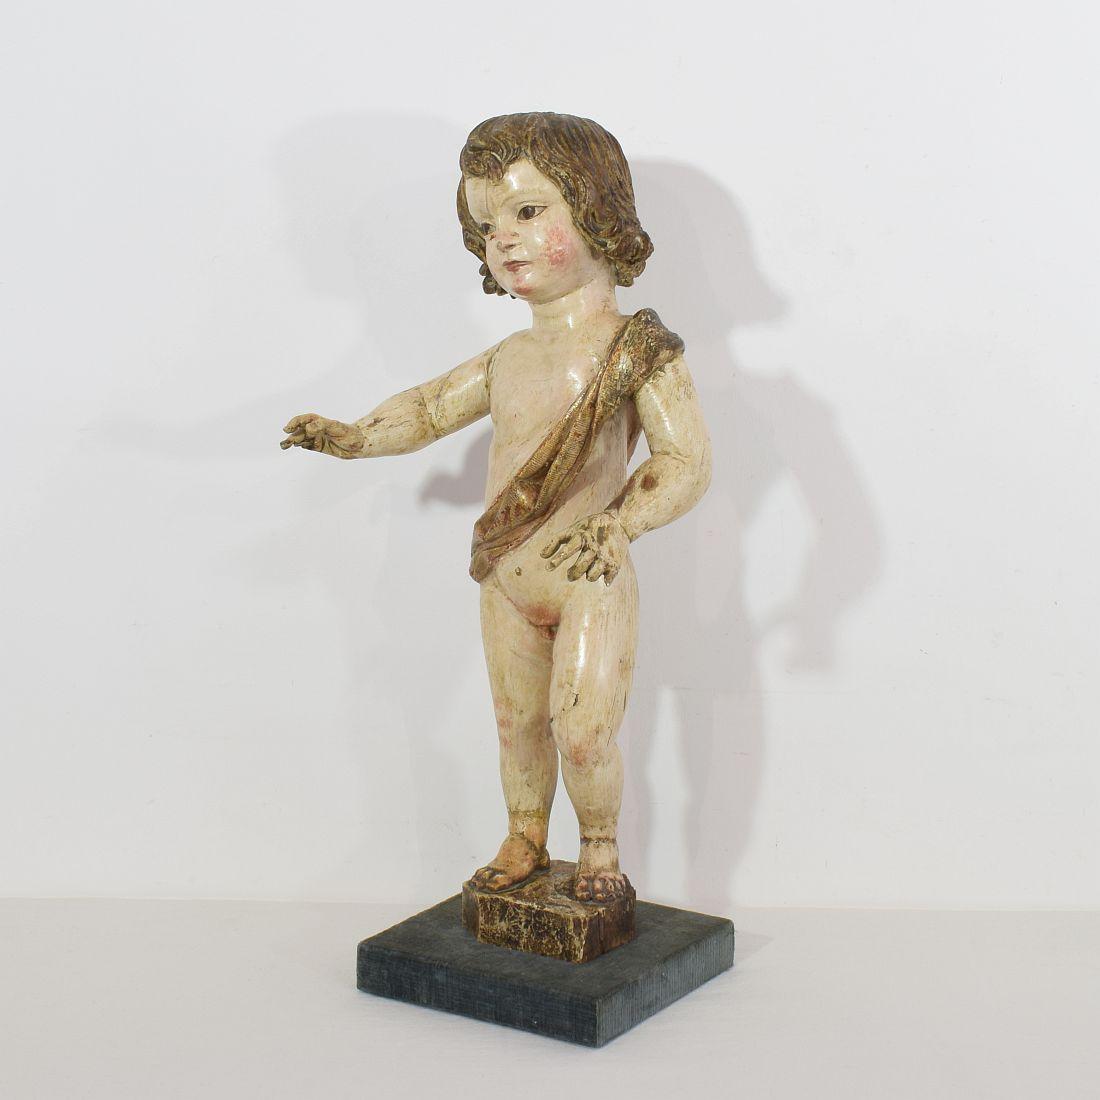 Fabulous large baroque baby Jesus with original color. Spain, circa 1700-1750. Weathered, small losses and old repairs.
Measurement includes the base of later date. More pictures available on request.